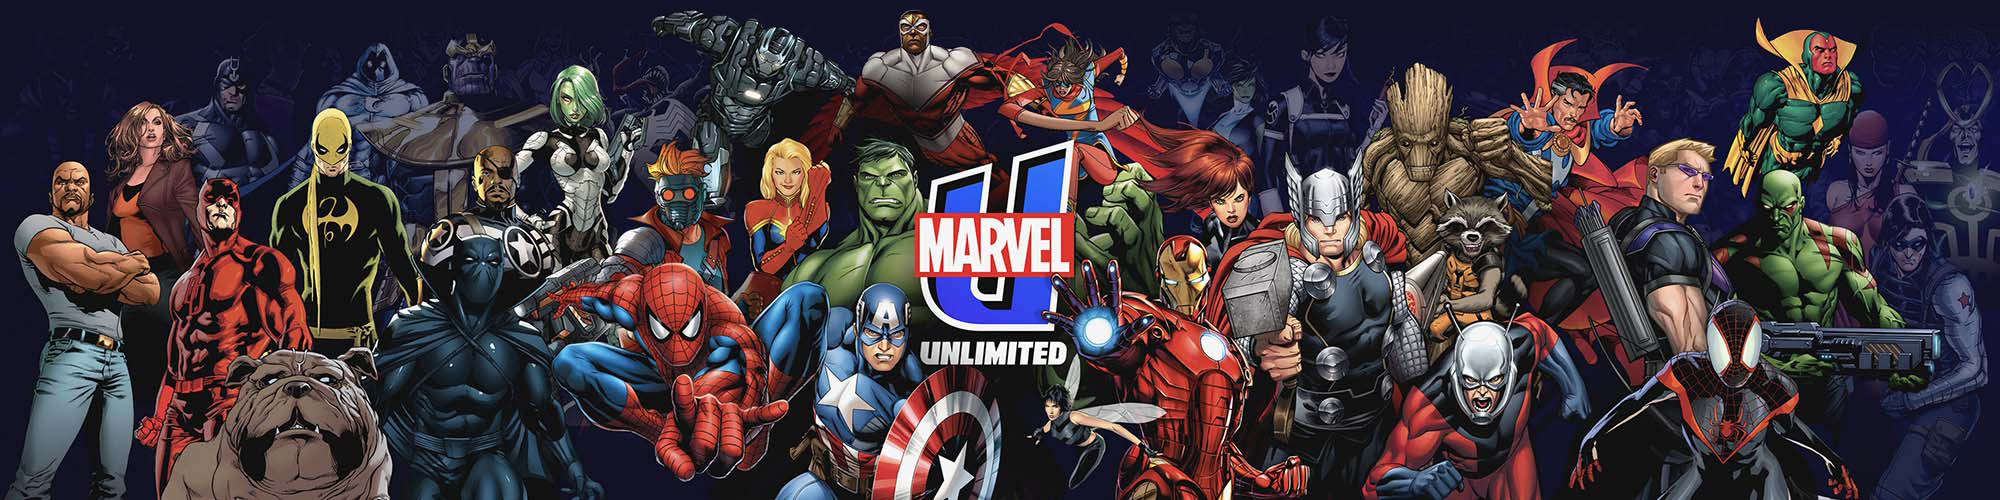 Marvel Unlimited Characters